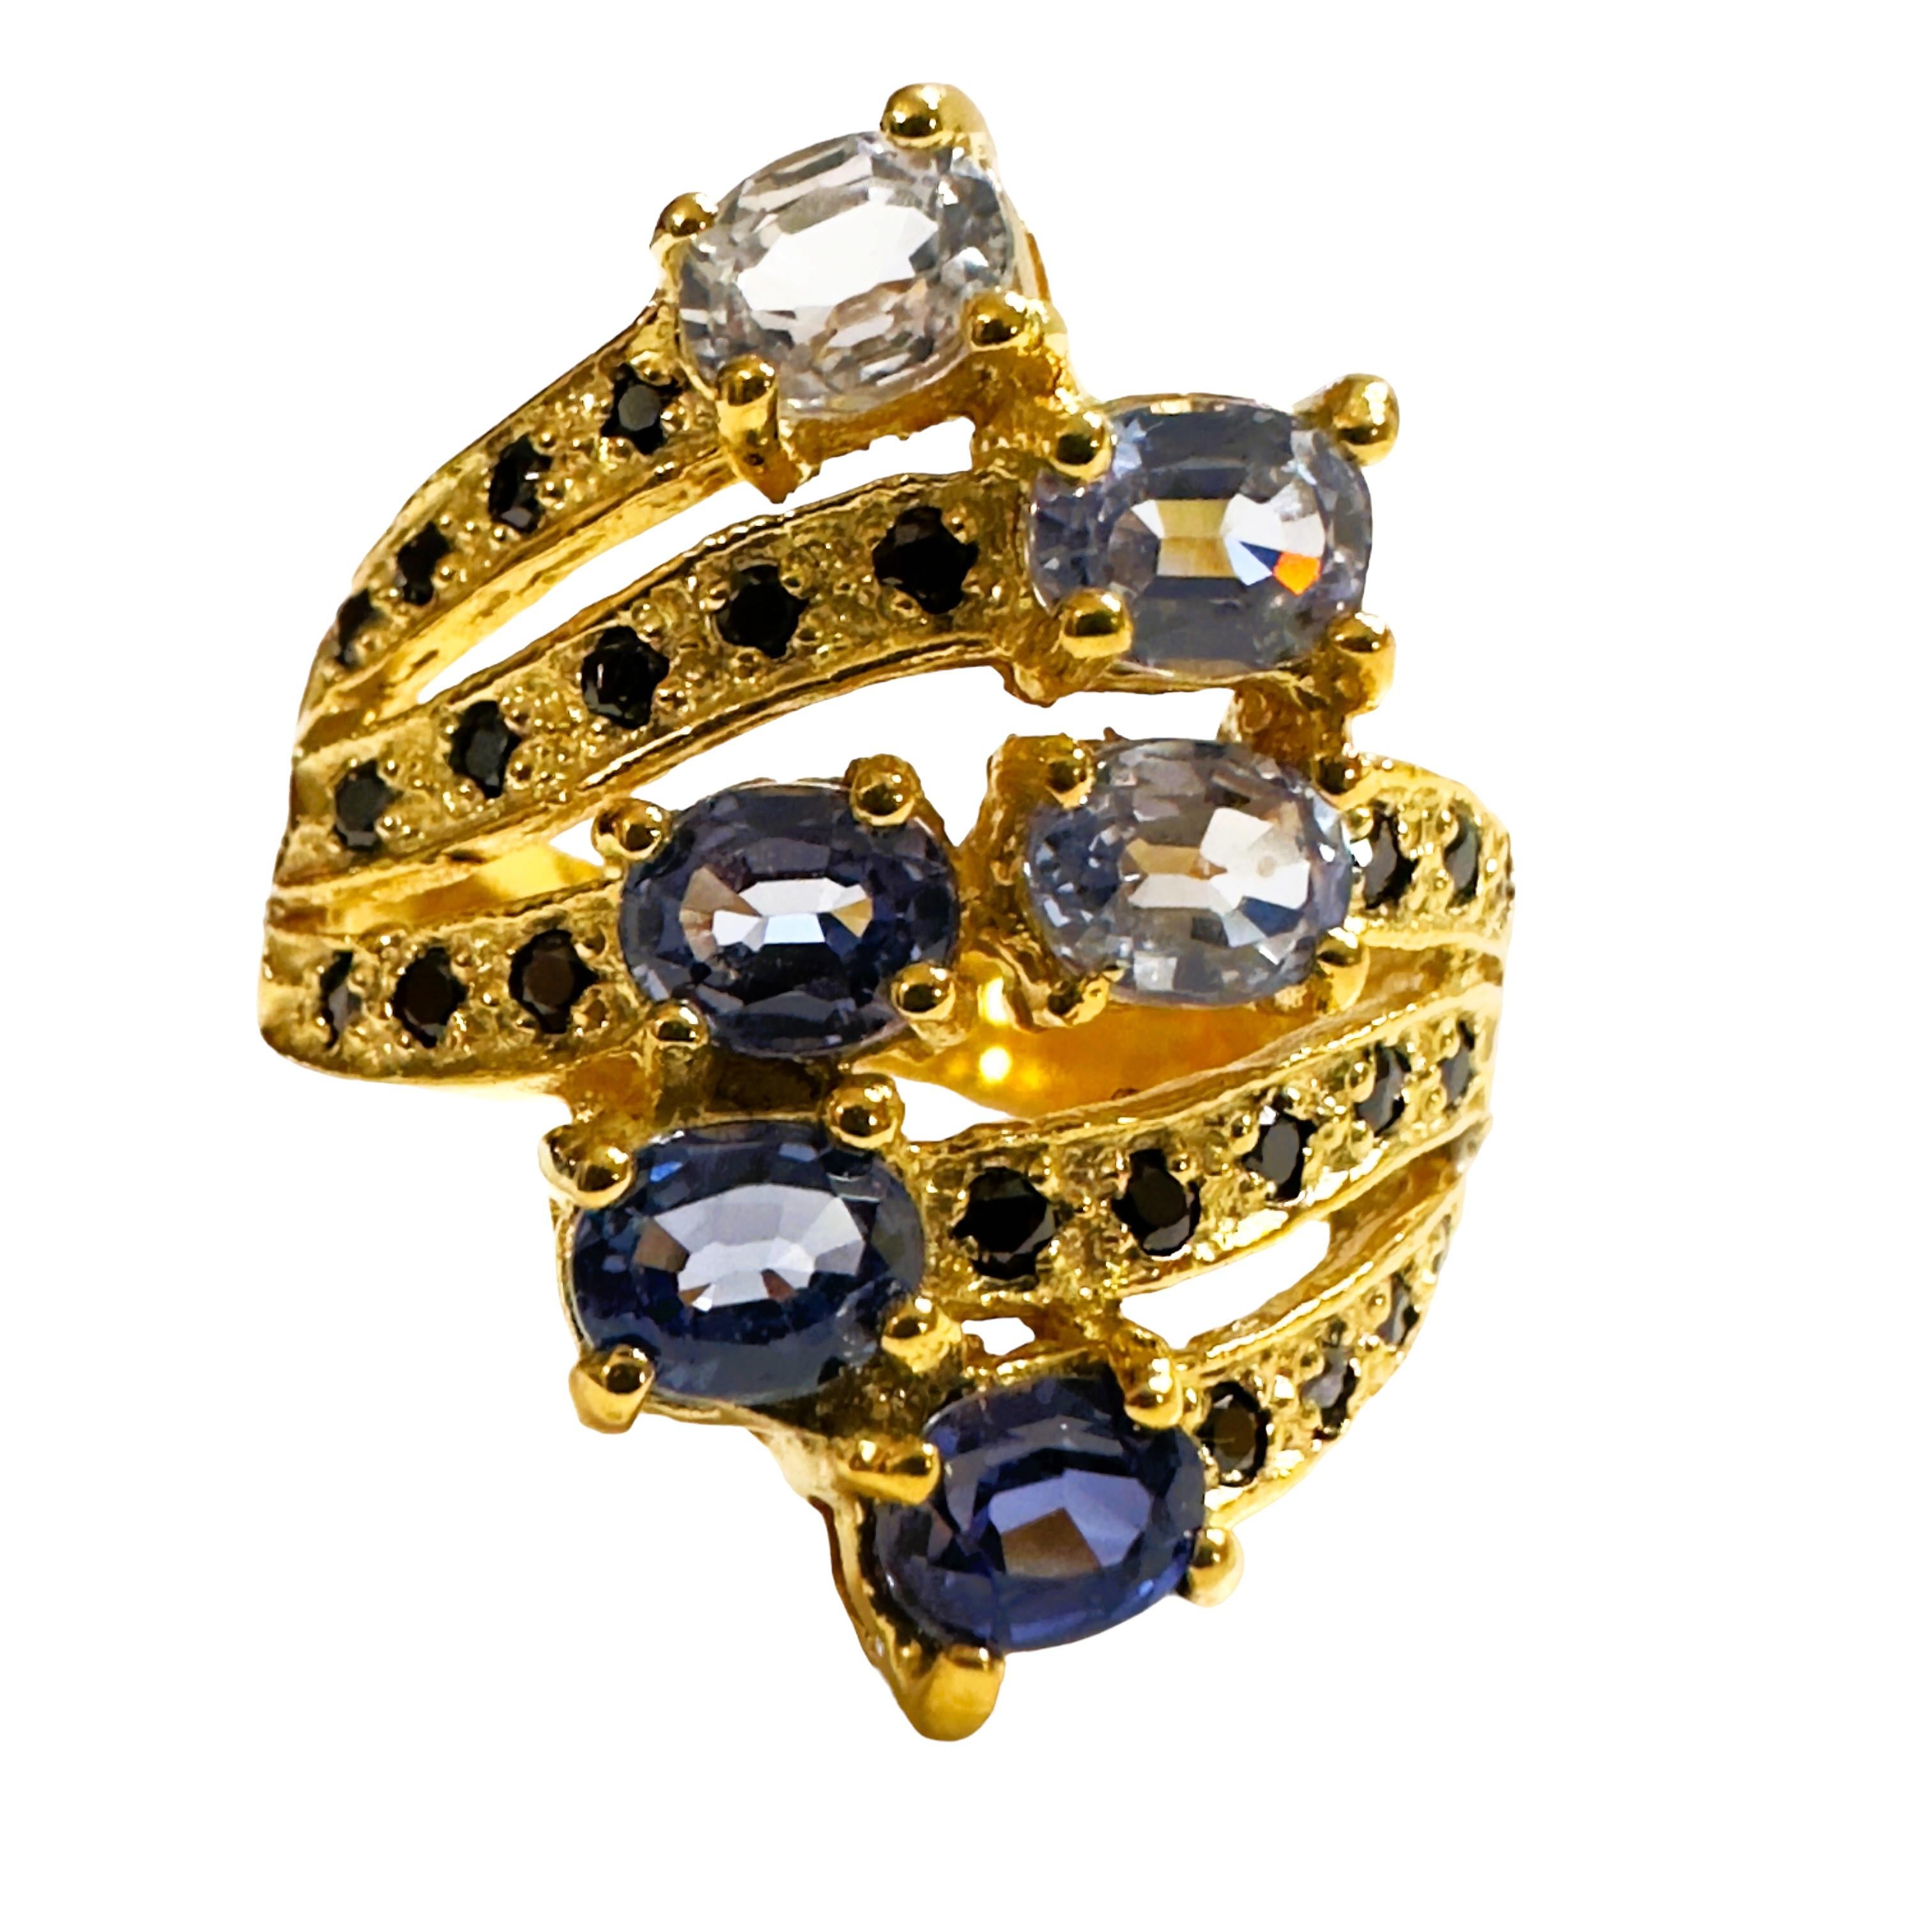 What a beautiful ring!  It has 6 oval Cornflower Sapphires in varying degrees of color. and also has diamond cut Black Spinels swirled around the band. 
 The ring is a size 8.  The stones are from Africa and are just exquisite.  The 